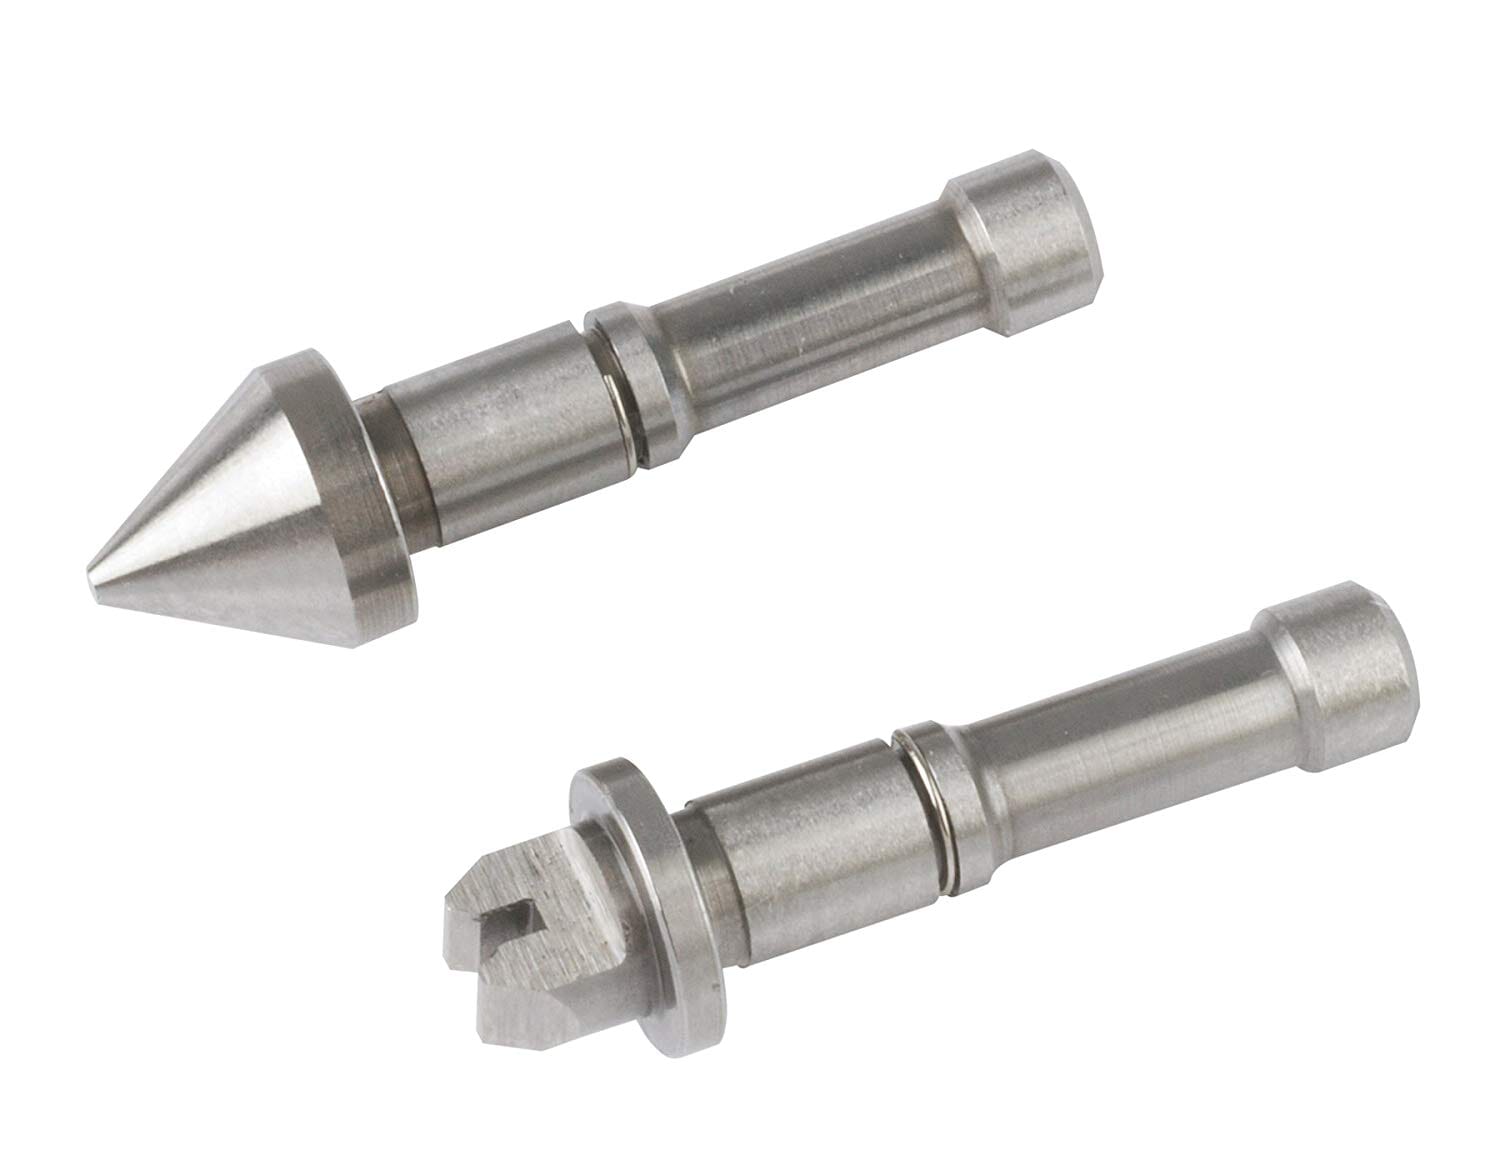 Mitutoyo Anvil And Spindle Tip 0.4-0.5Mm/64-48Tpi